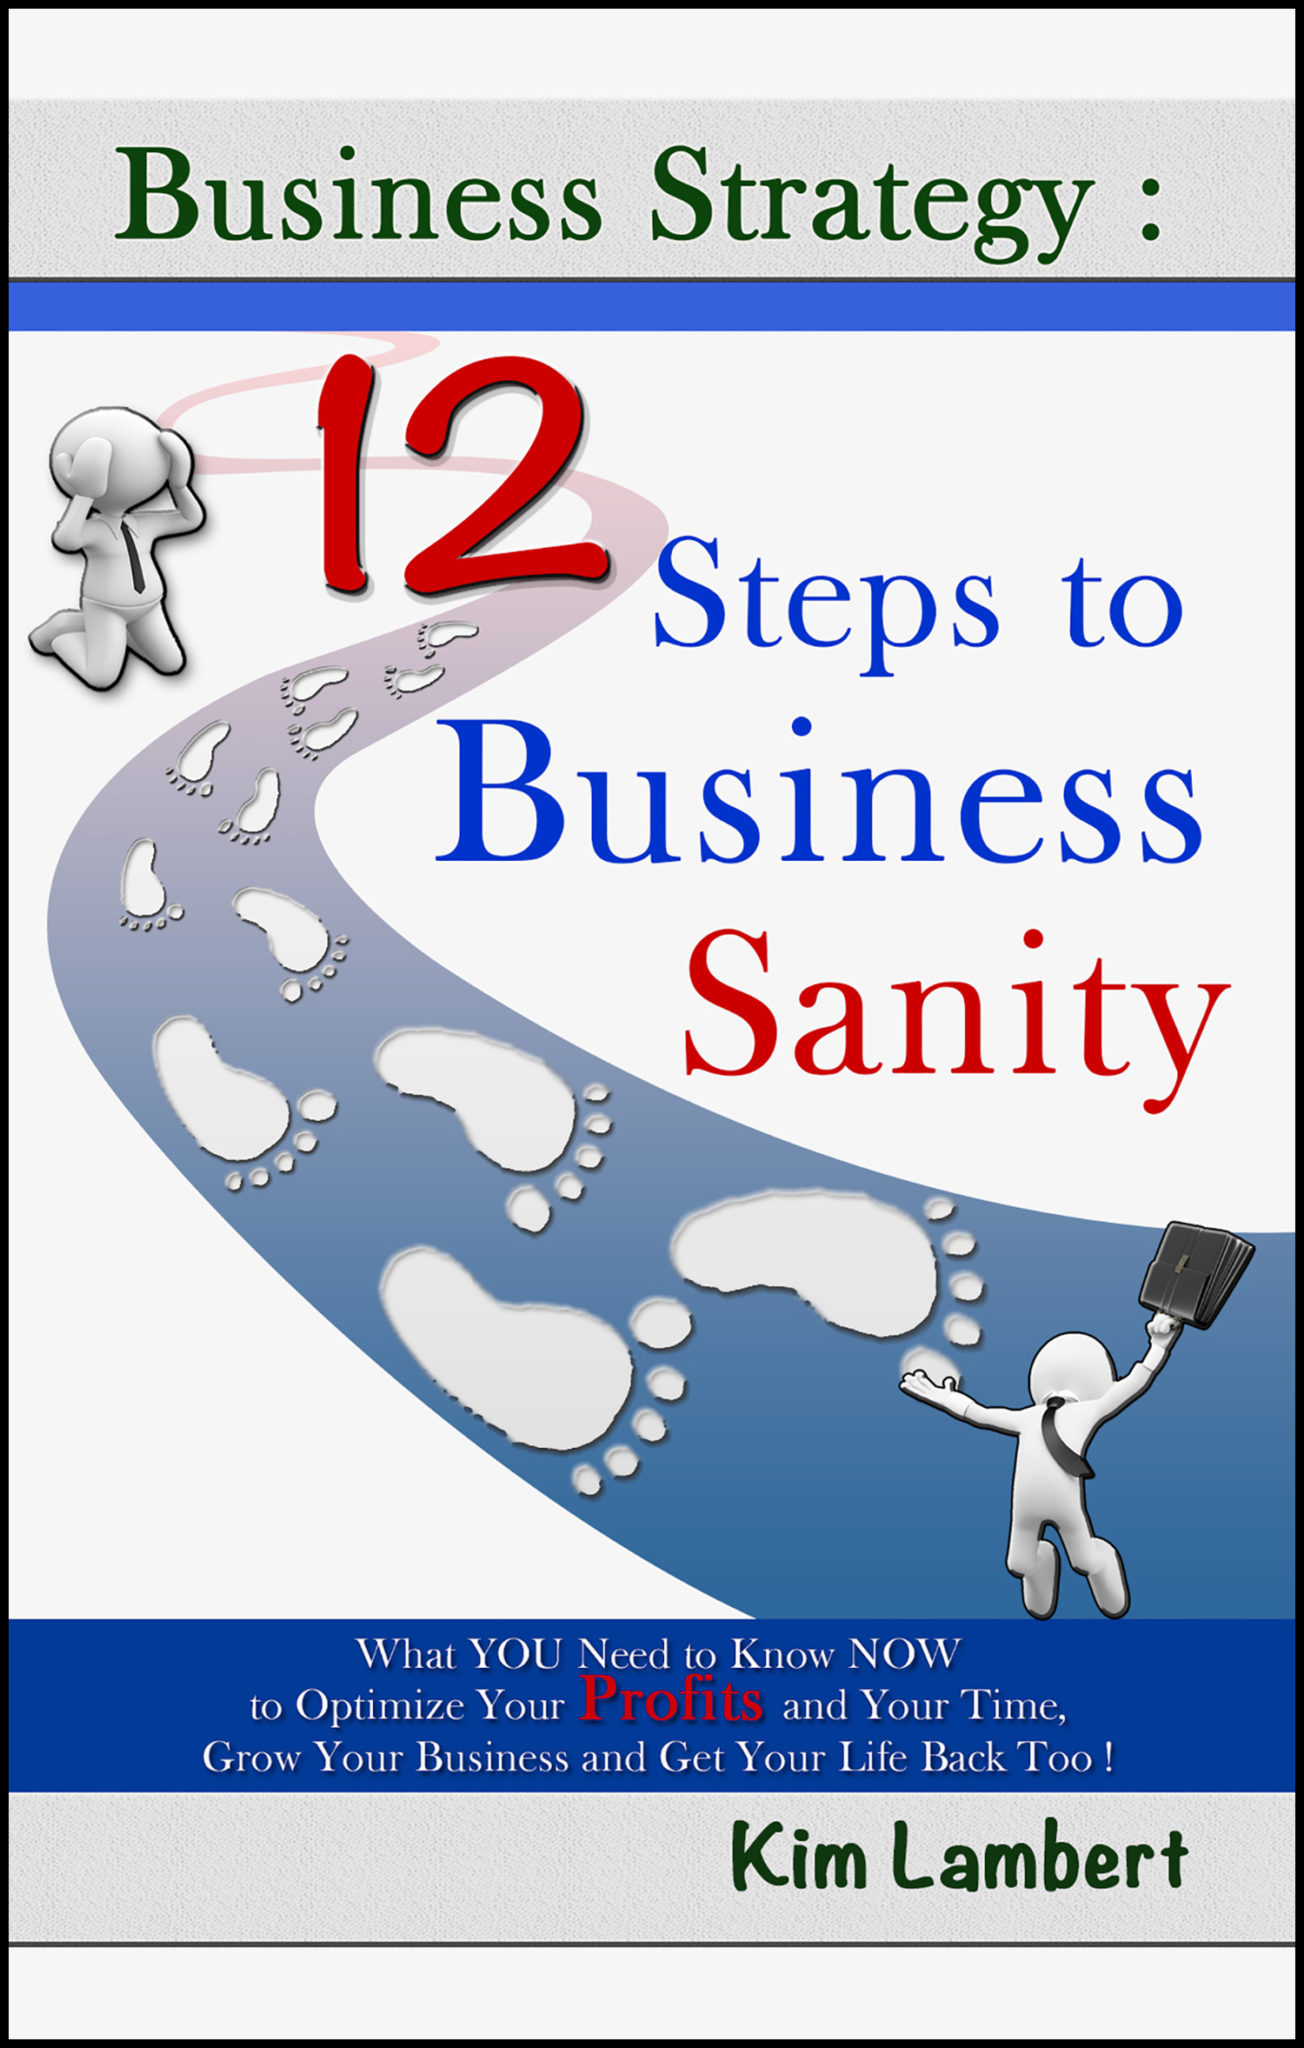 Business Strategy: 12 Steps to Business Sanity – What You Need to Know NOW to optimize your Profits, and Your Time, Grow Your Business, and Get Your Life Back Too! by Kim Lambert